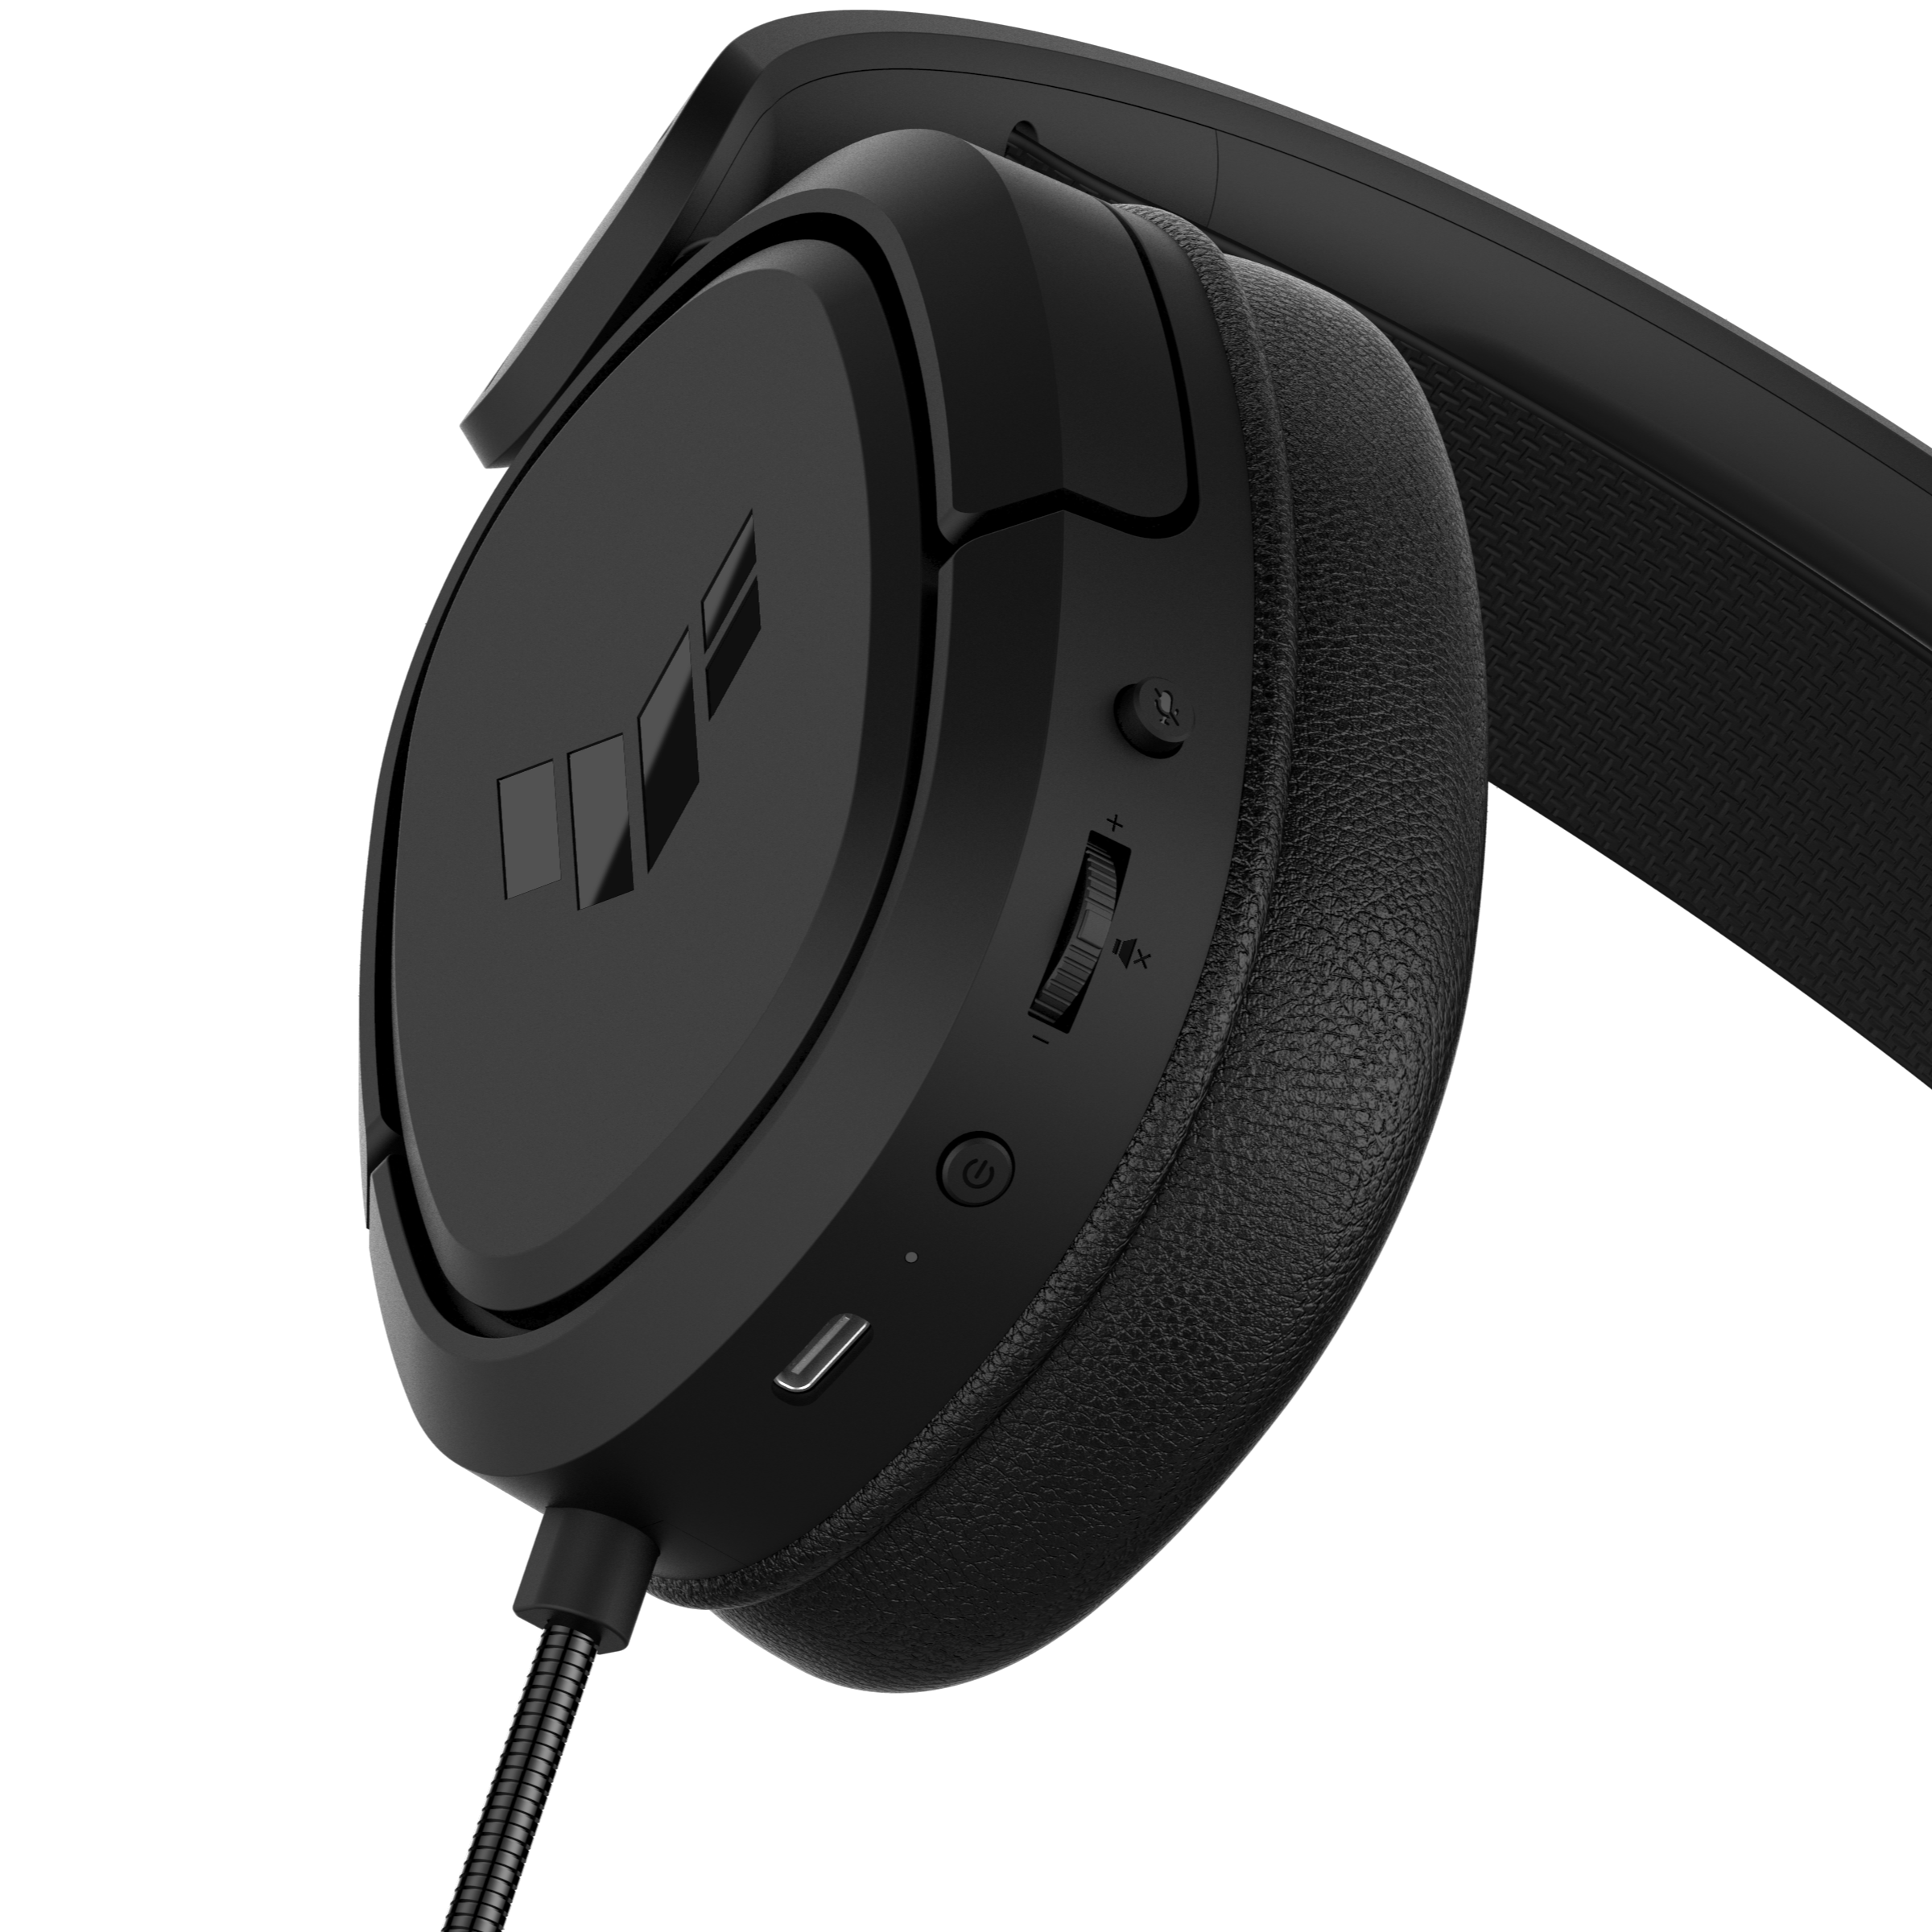  ASUS TUF Gaming H1 Wired Headset (Discord Certified